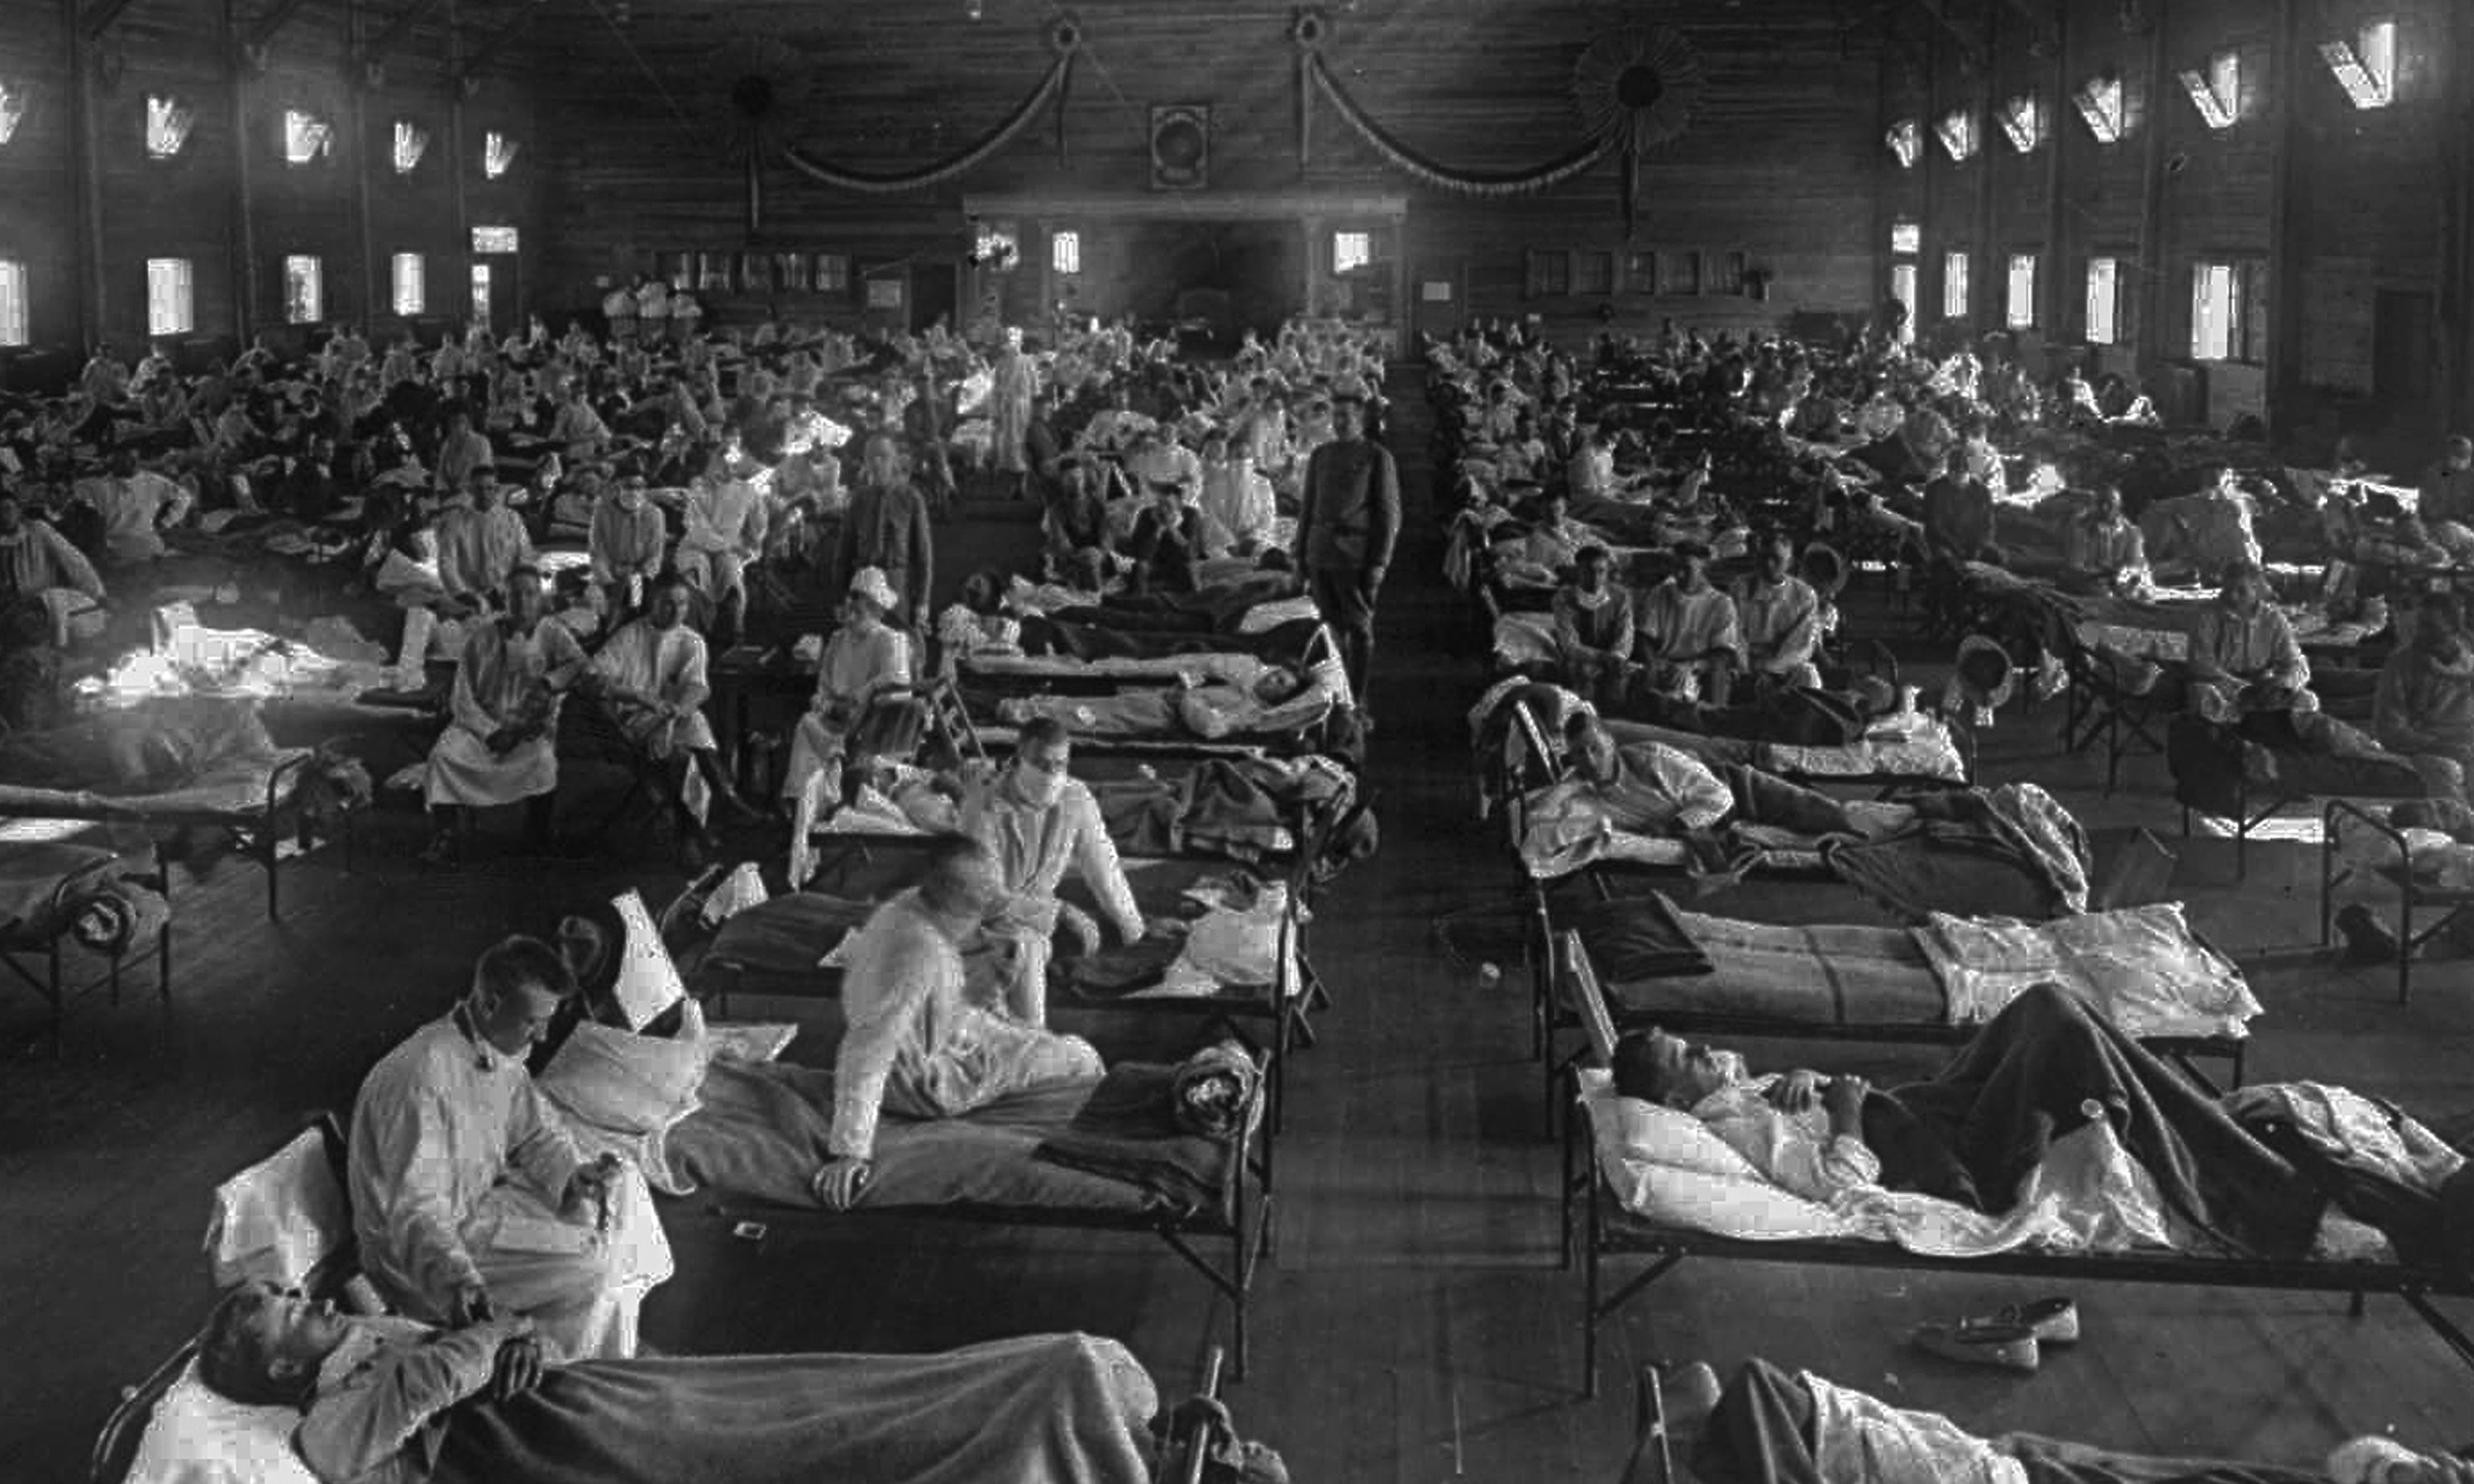 experimenting-with-a-new-spanish-flu-is-everybody-s-business-philip-ball-comment-is-free